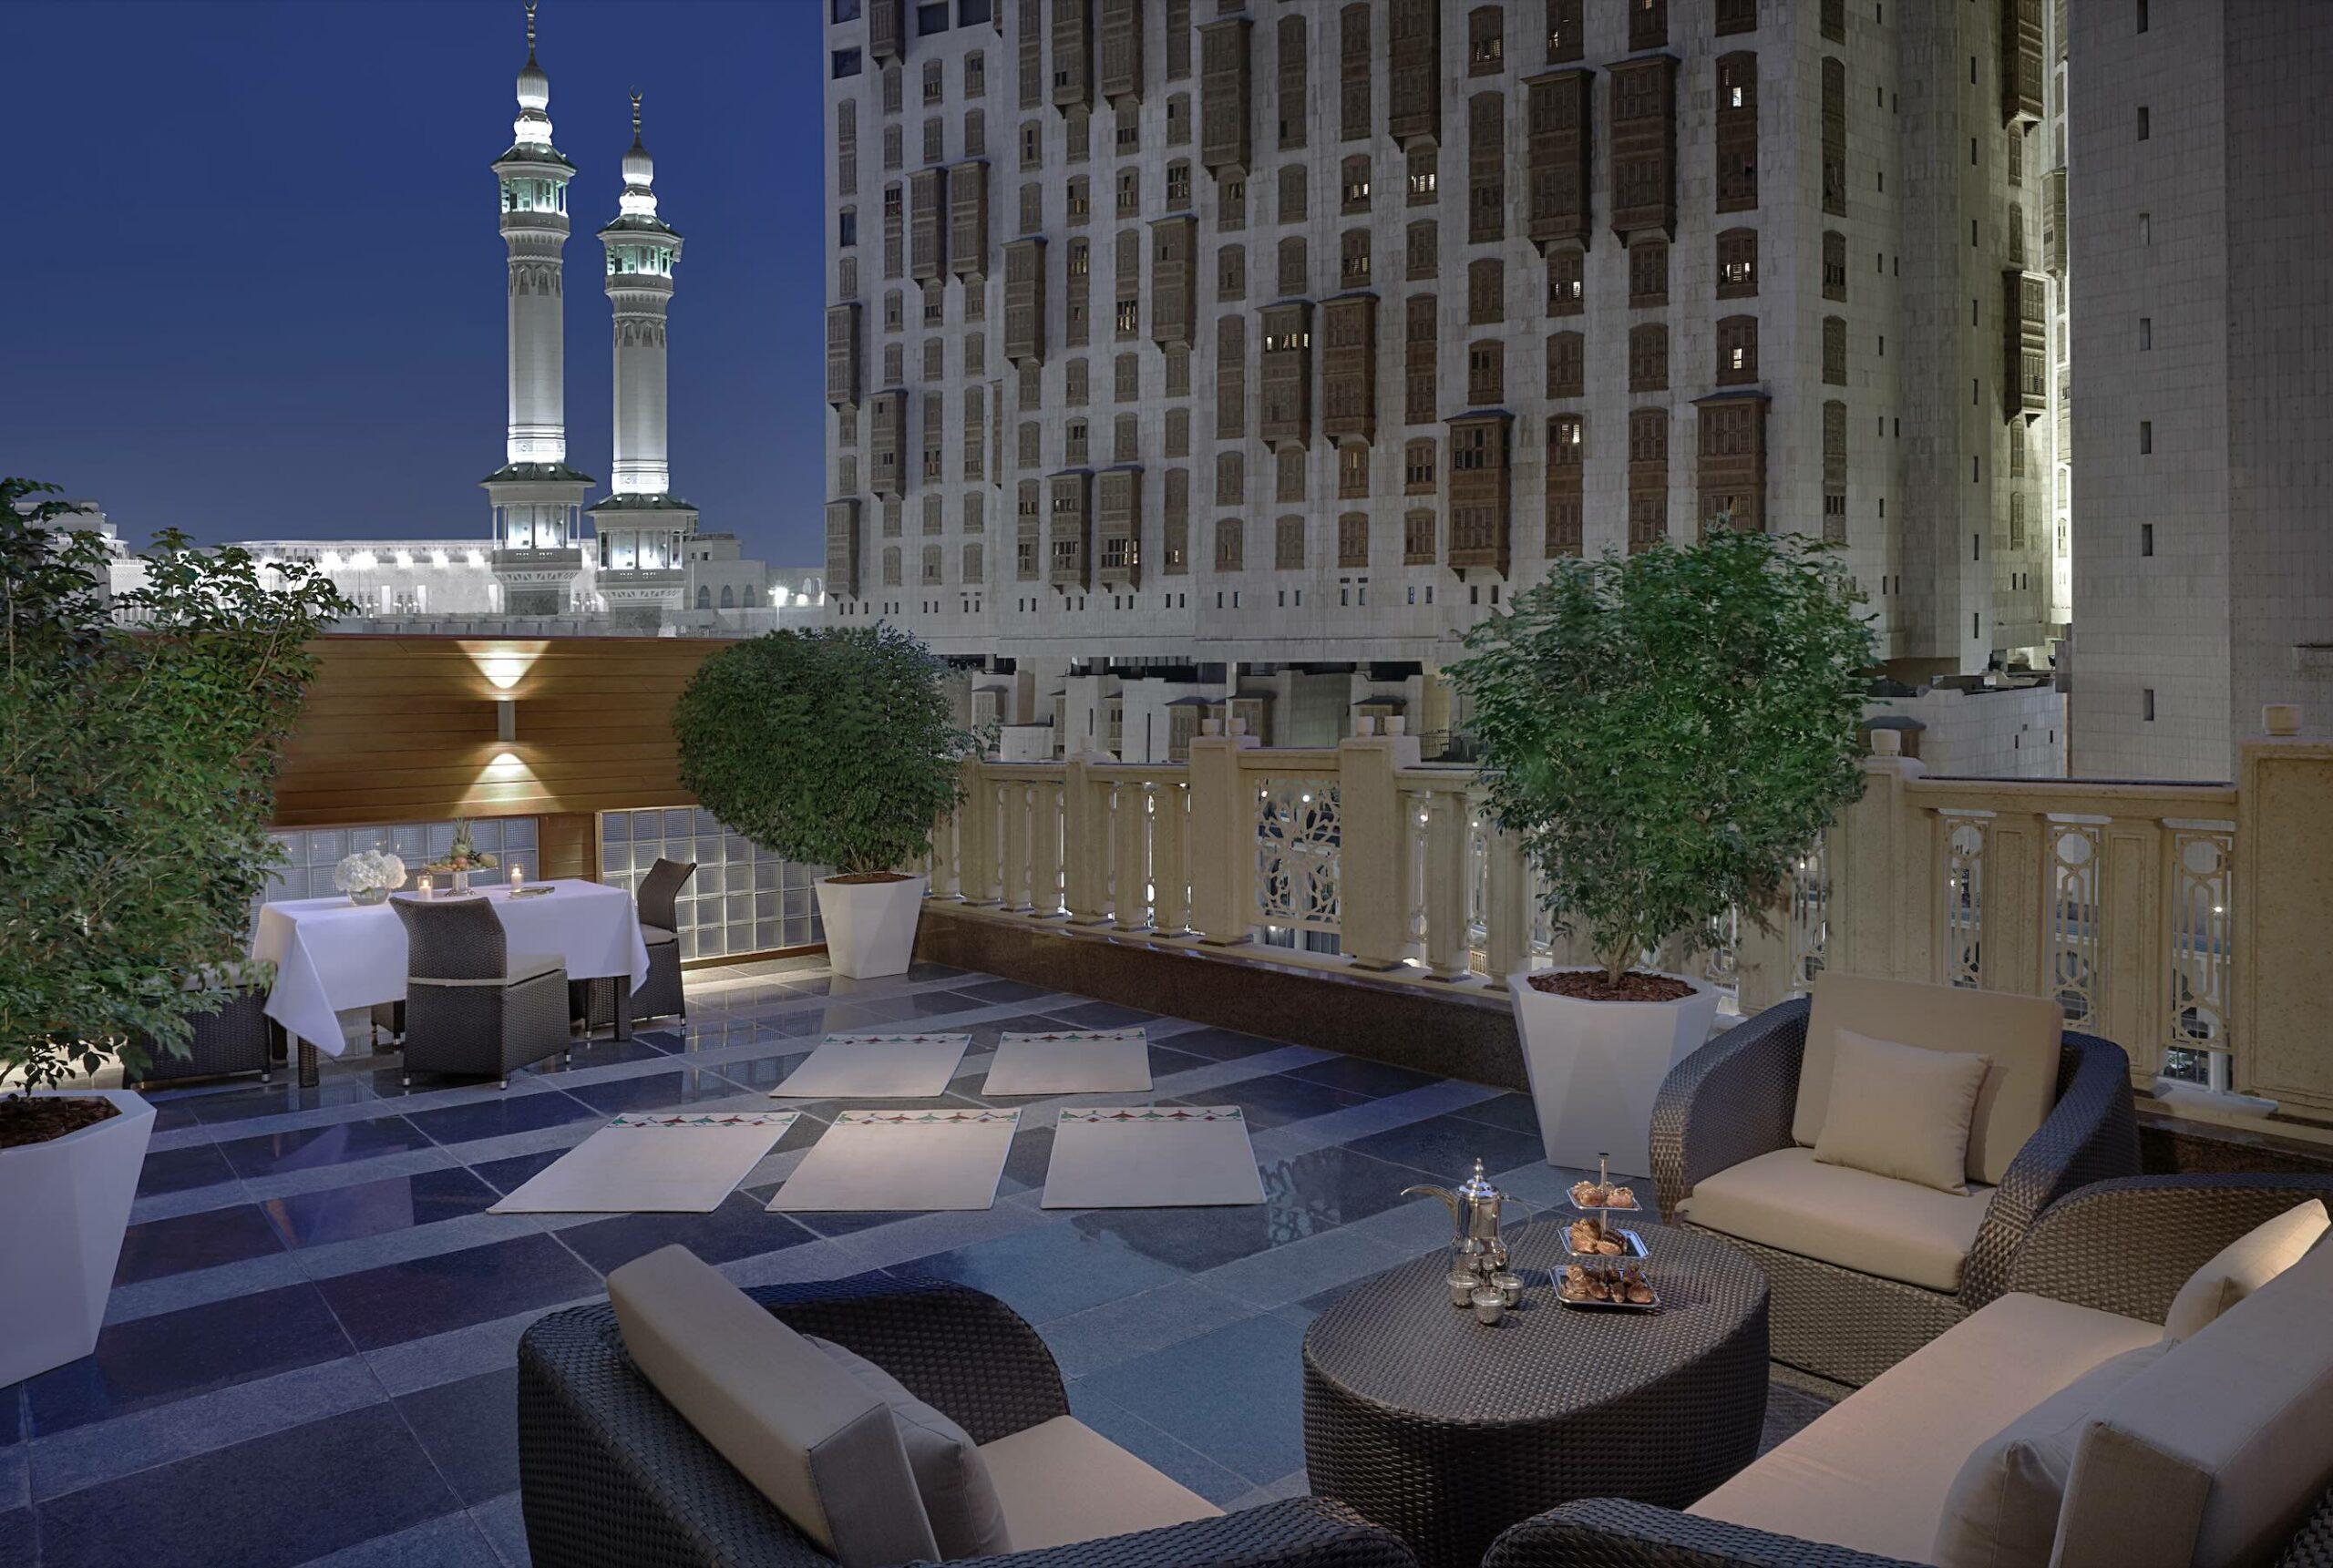 Jumeirah unveils its first hotel in Saudi Arabia